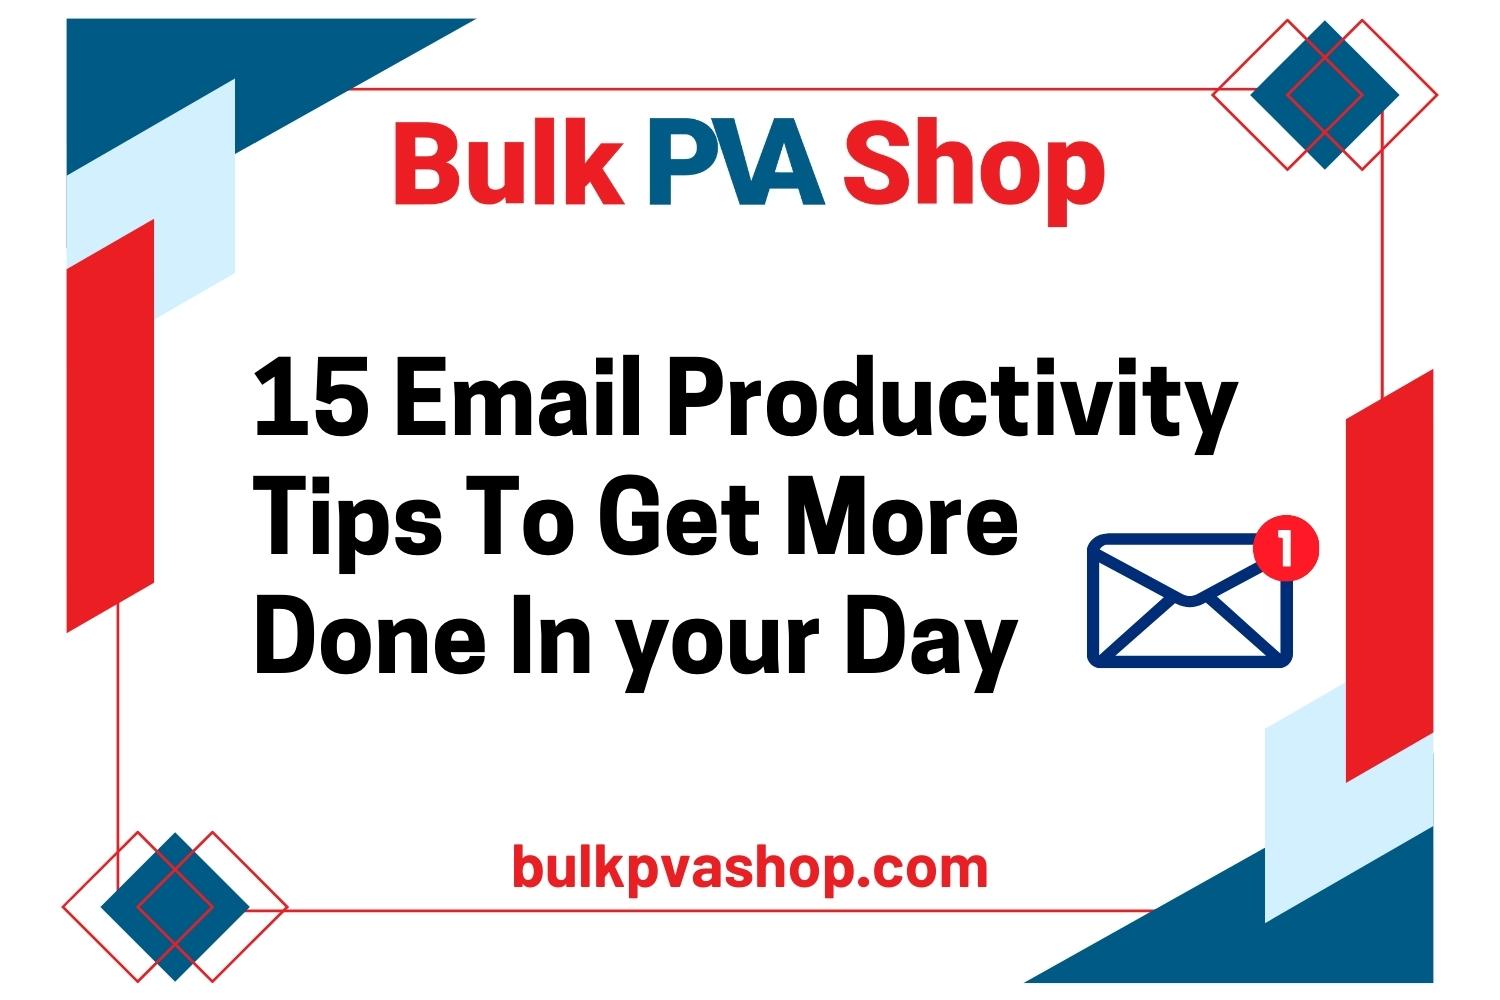 15 Email Productivity Tips To Get More Done In your Day